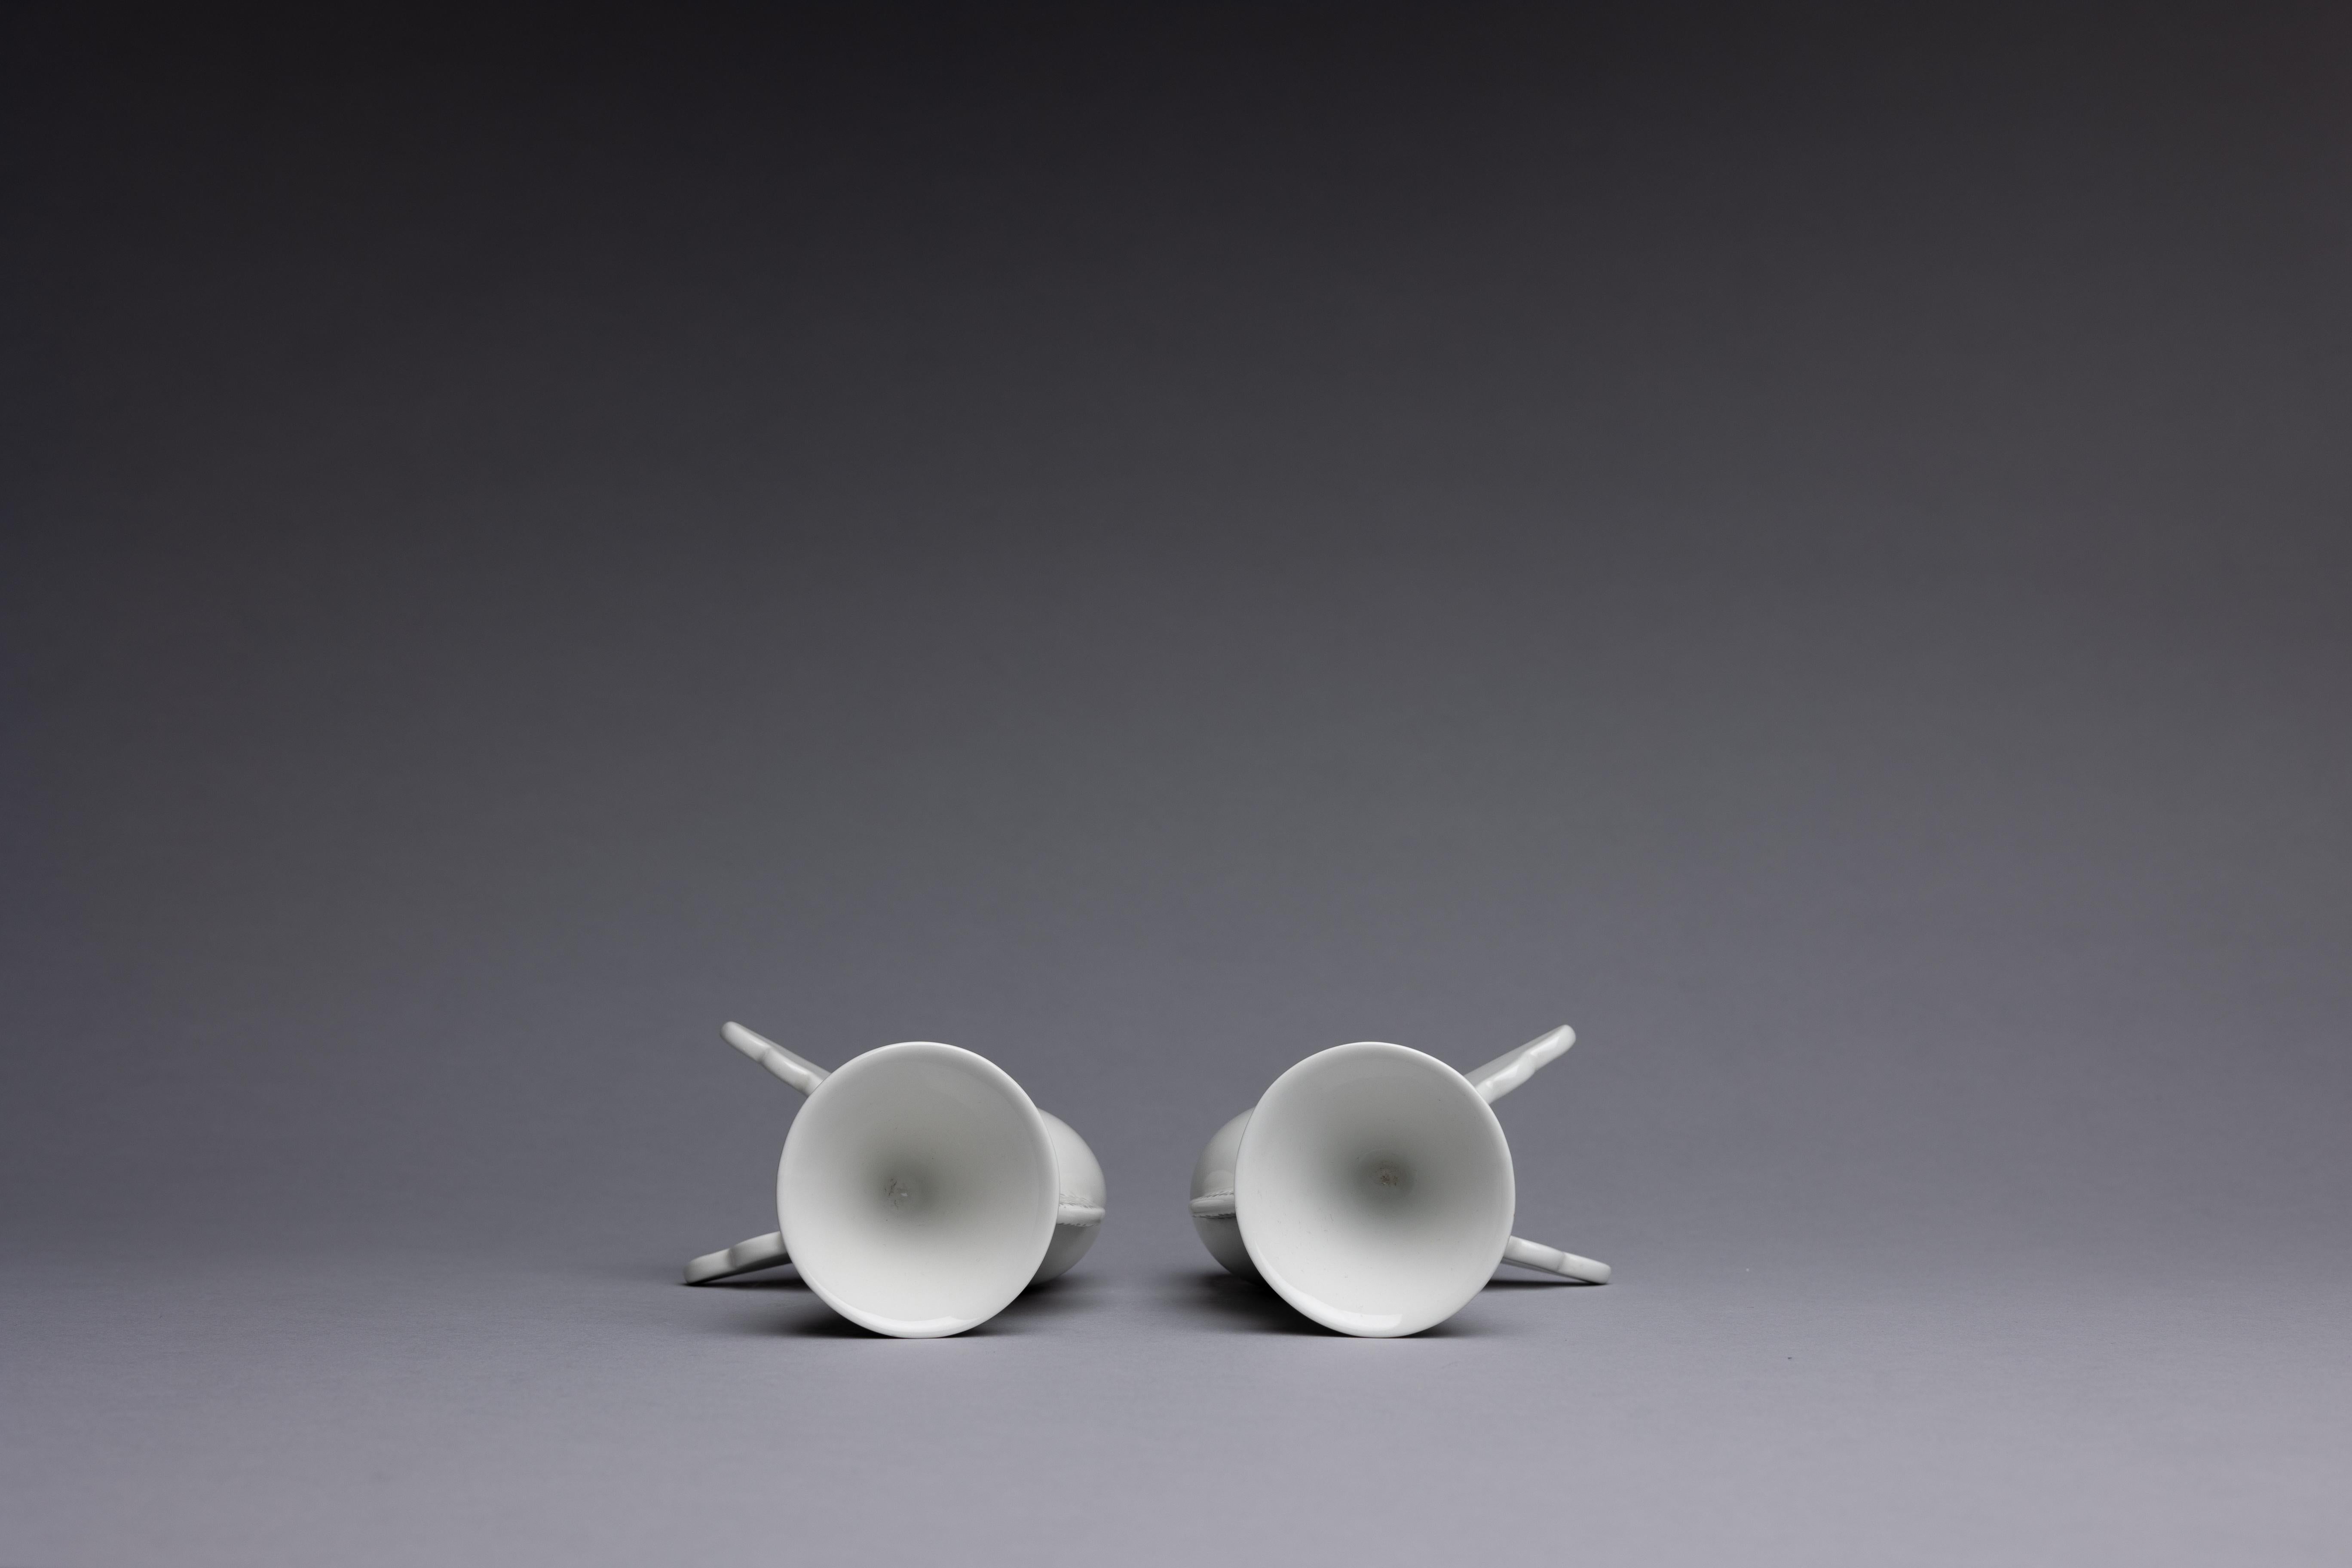 Glazed Matteo Thun Memphis Milano Pair of 'Onega' Cocktail Cups For Sale